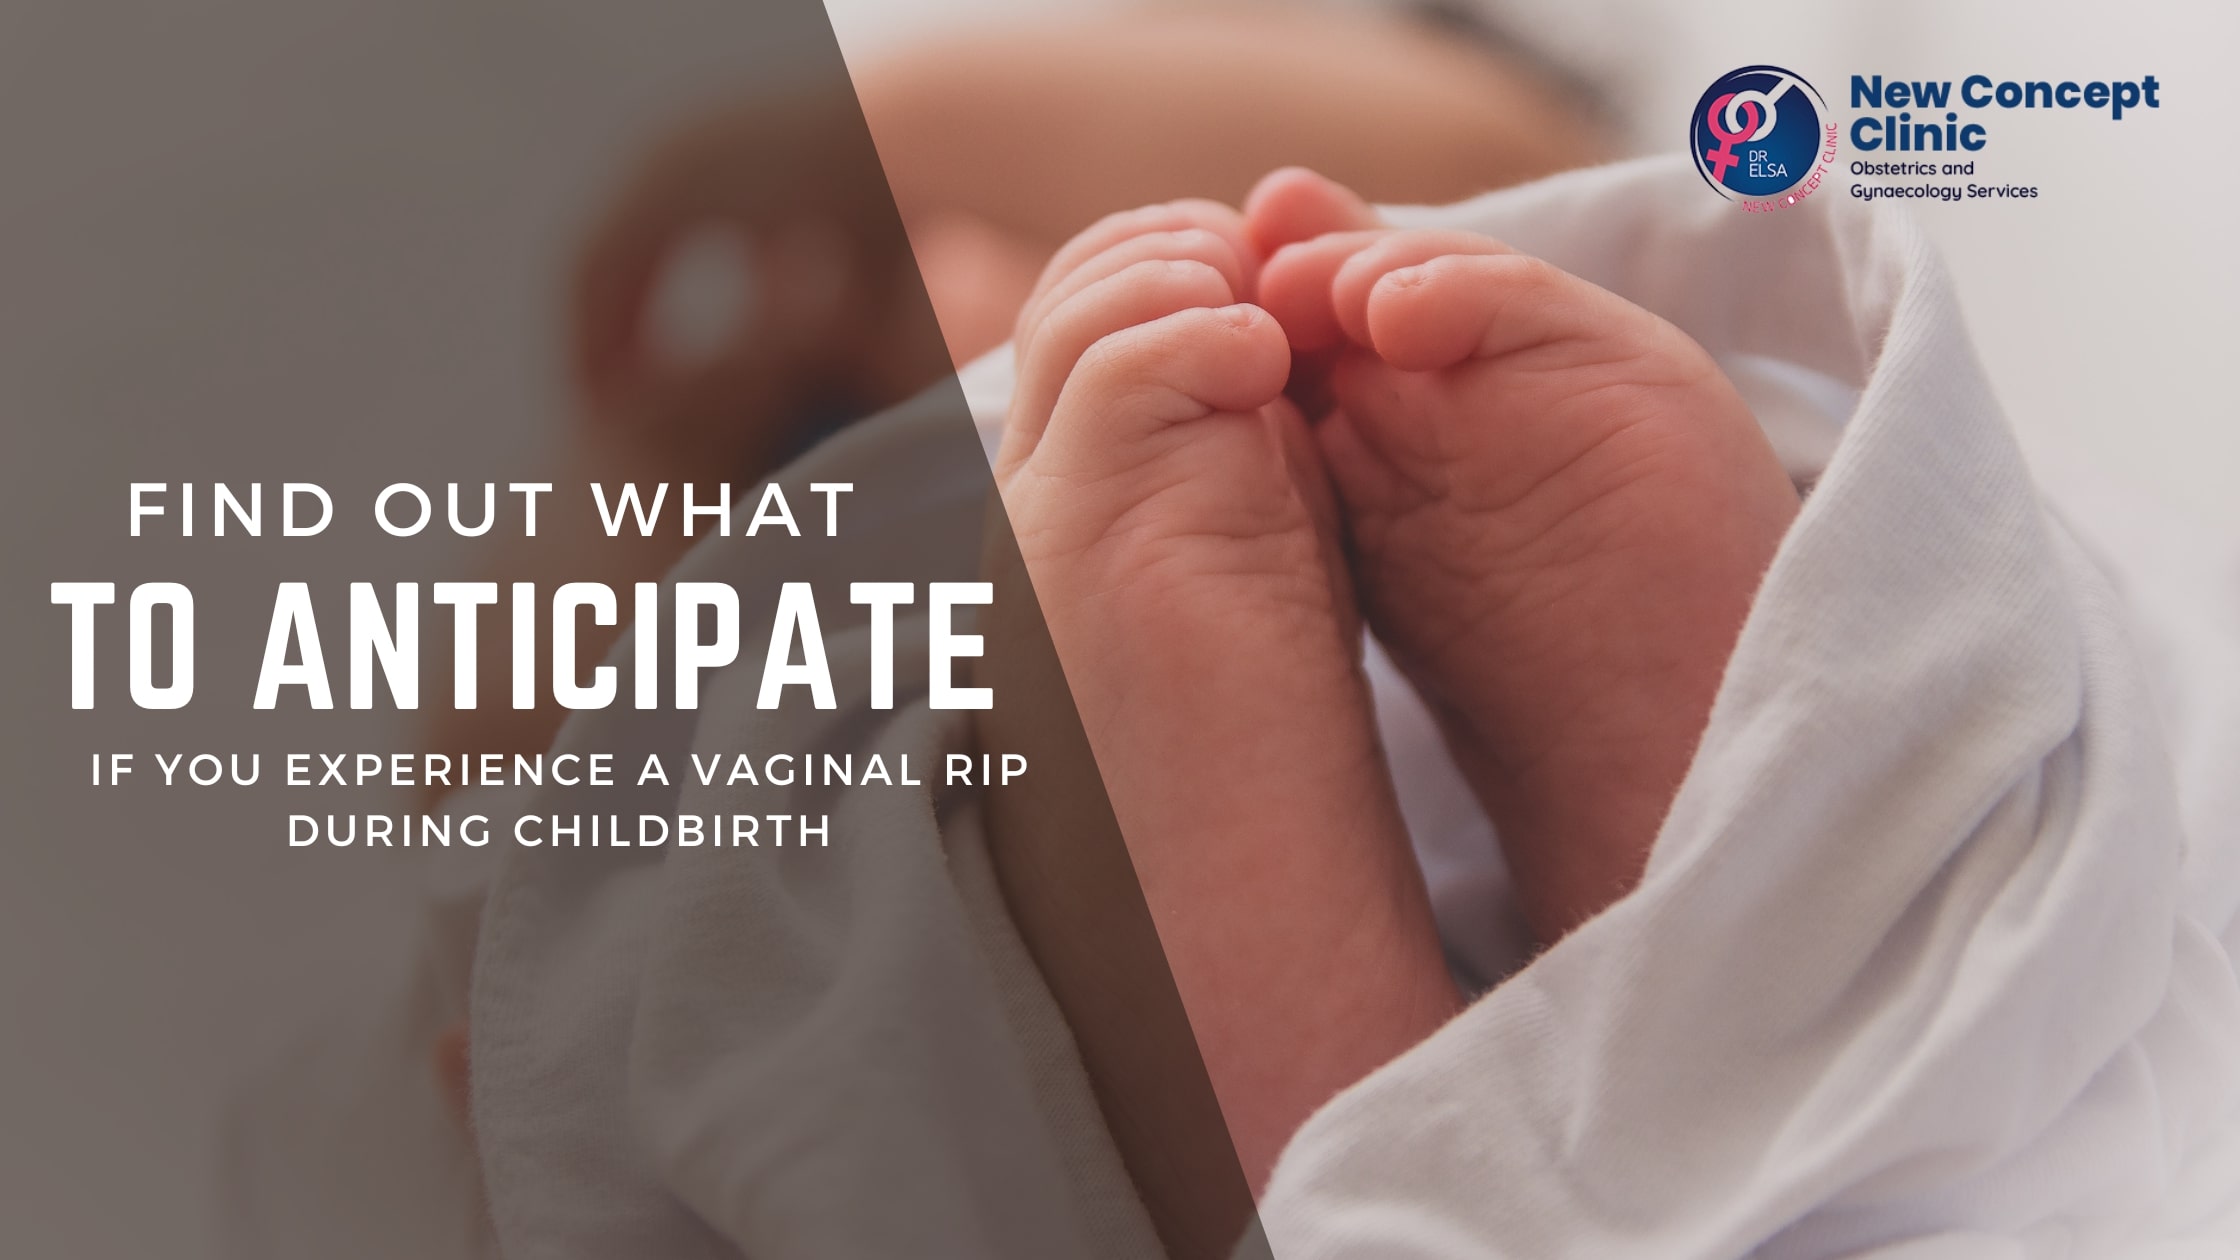 Find out what to anticipate if you experience a vaginal rip during childbirth 